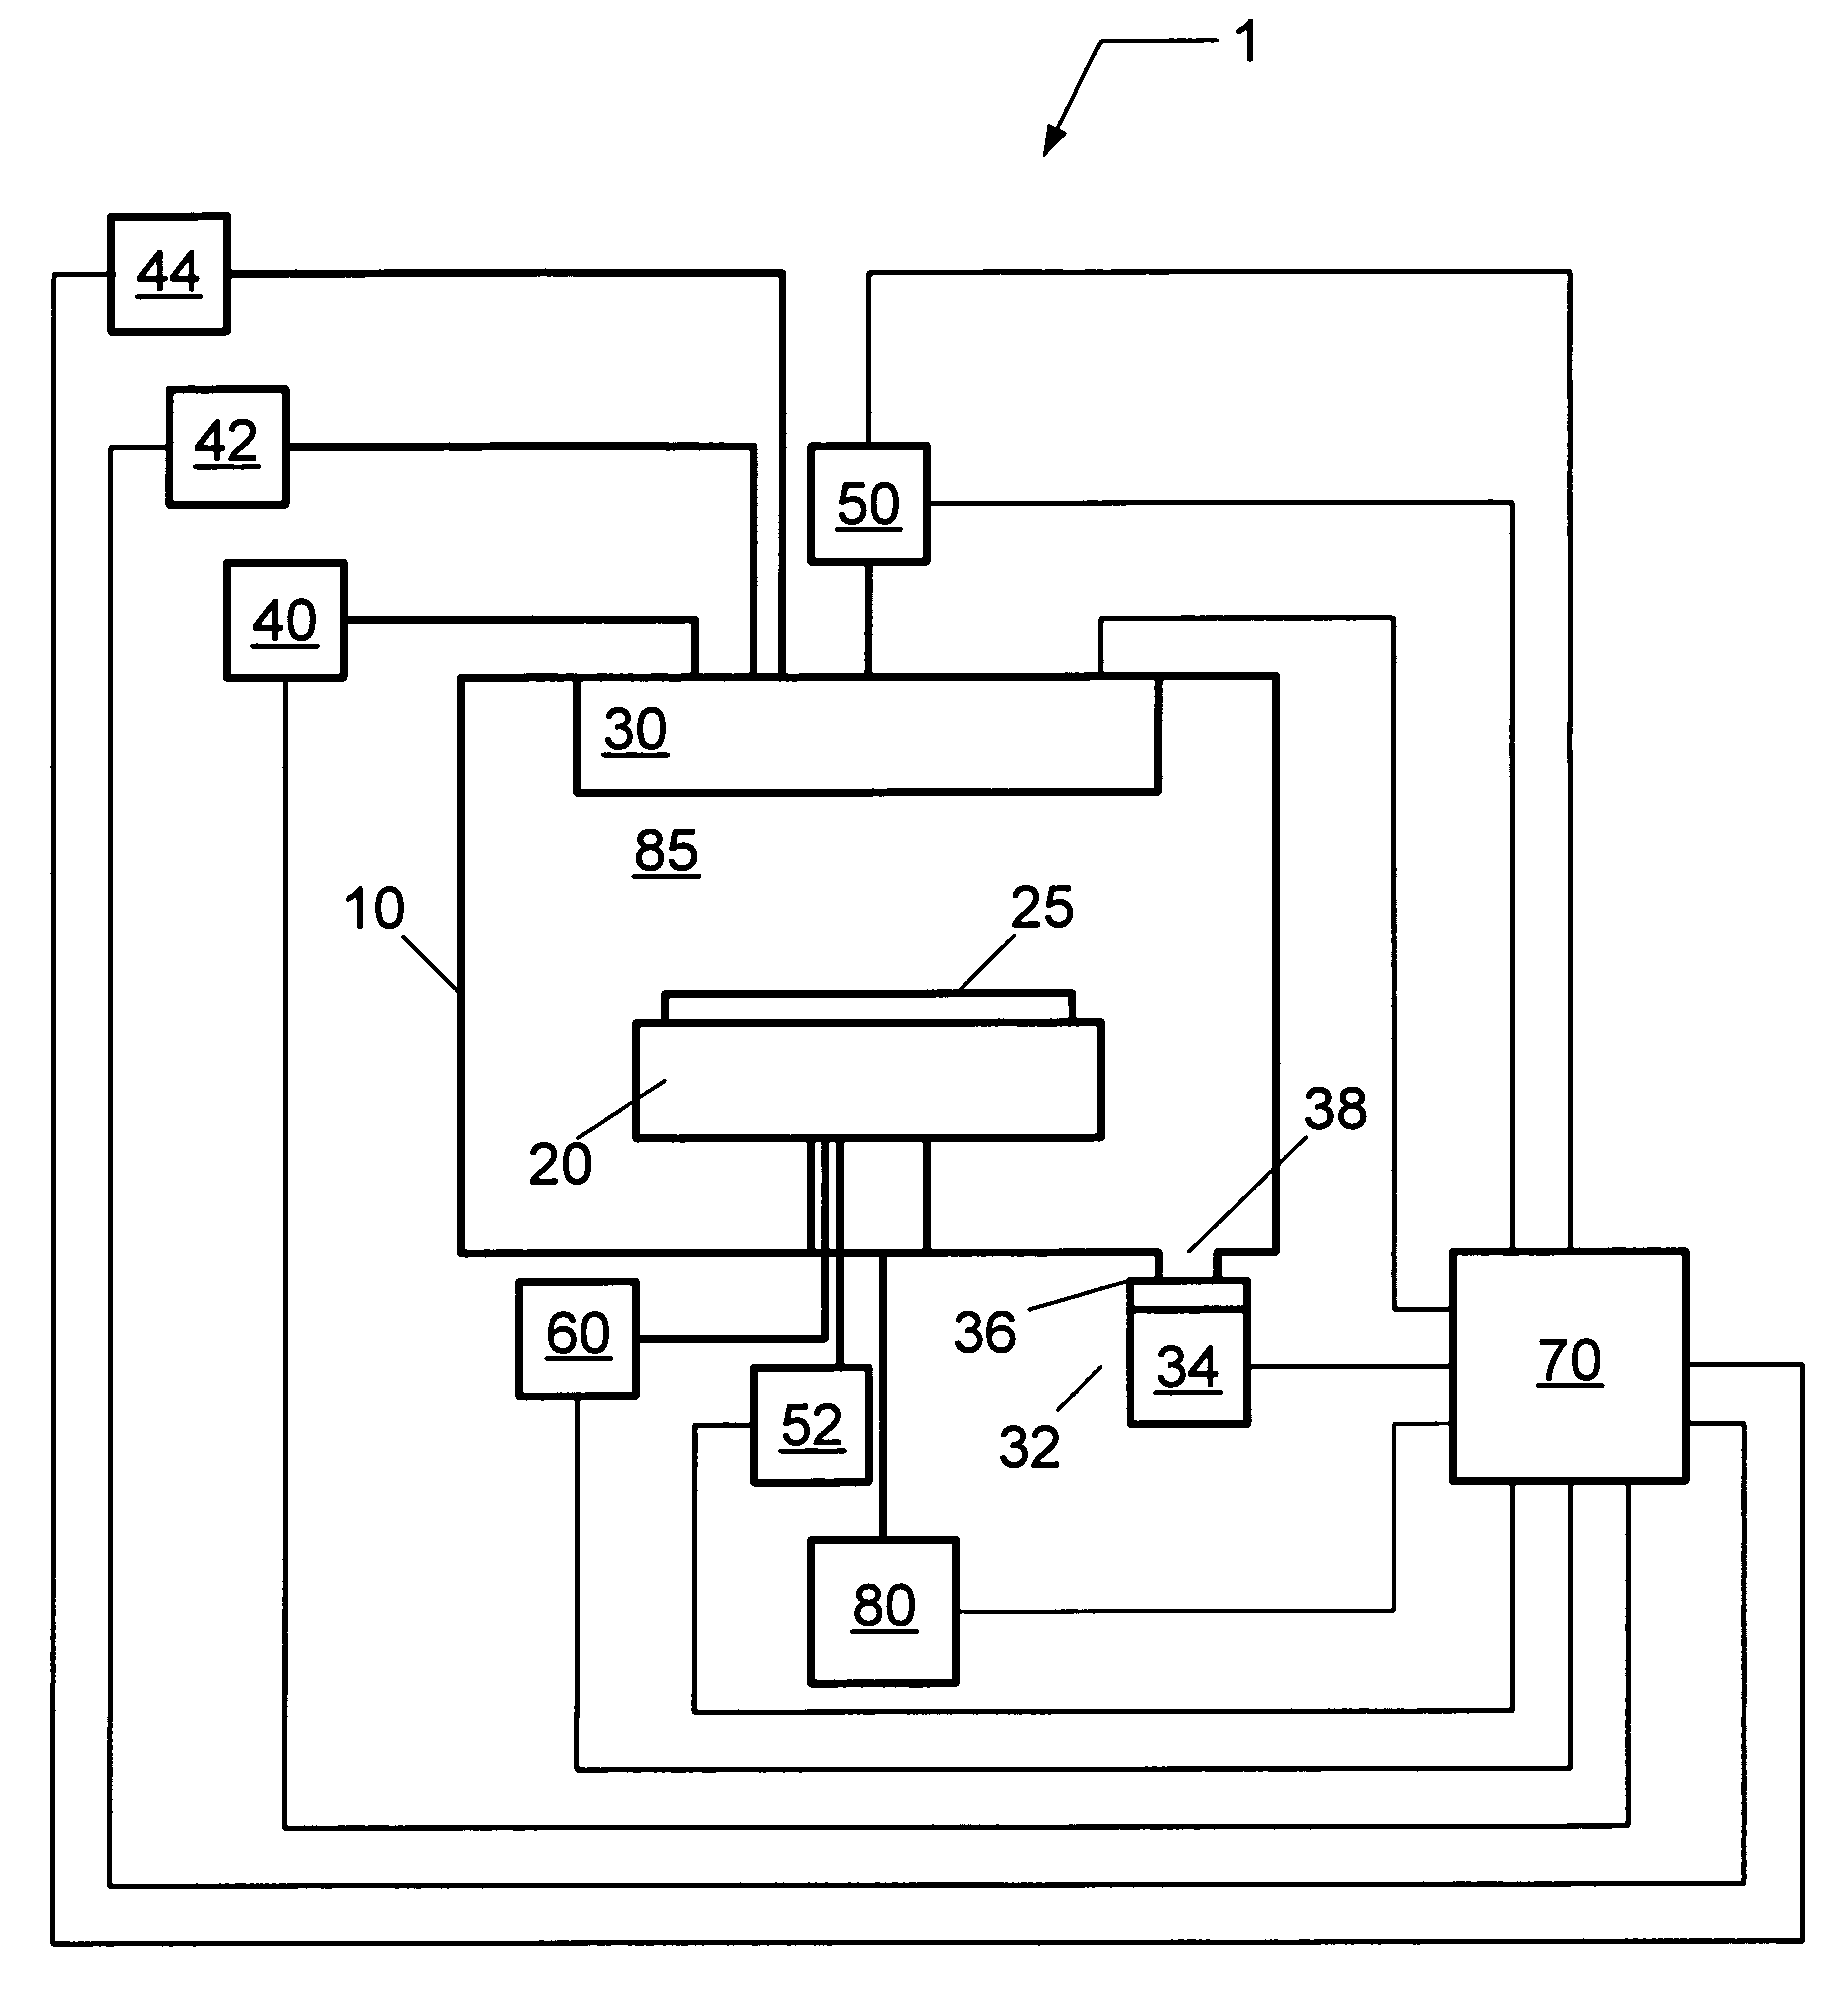 Method and system for performing plasma enhanced atomic layer deposition